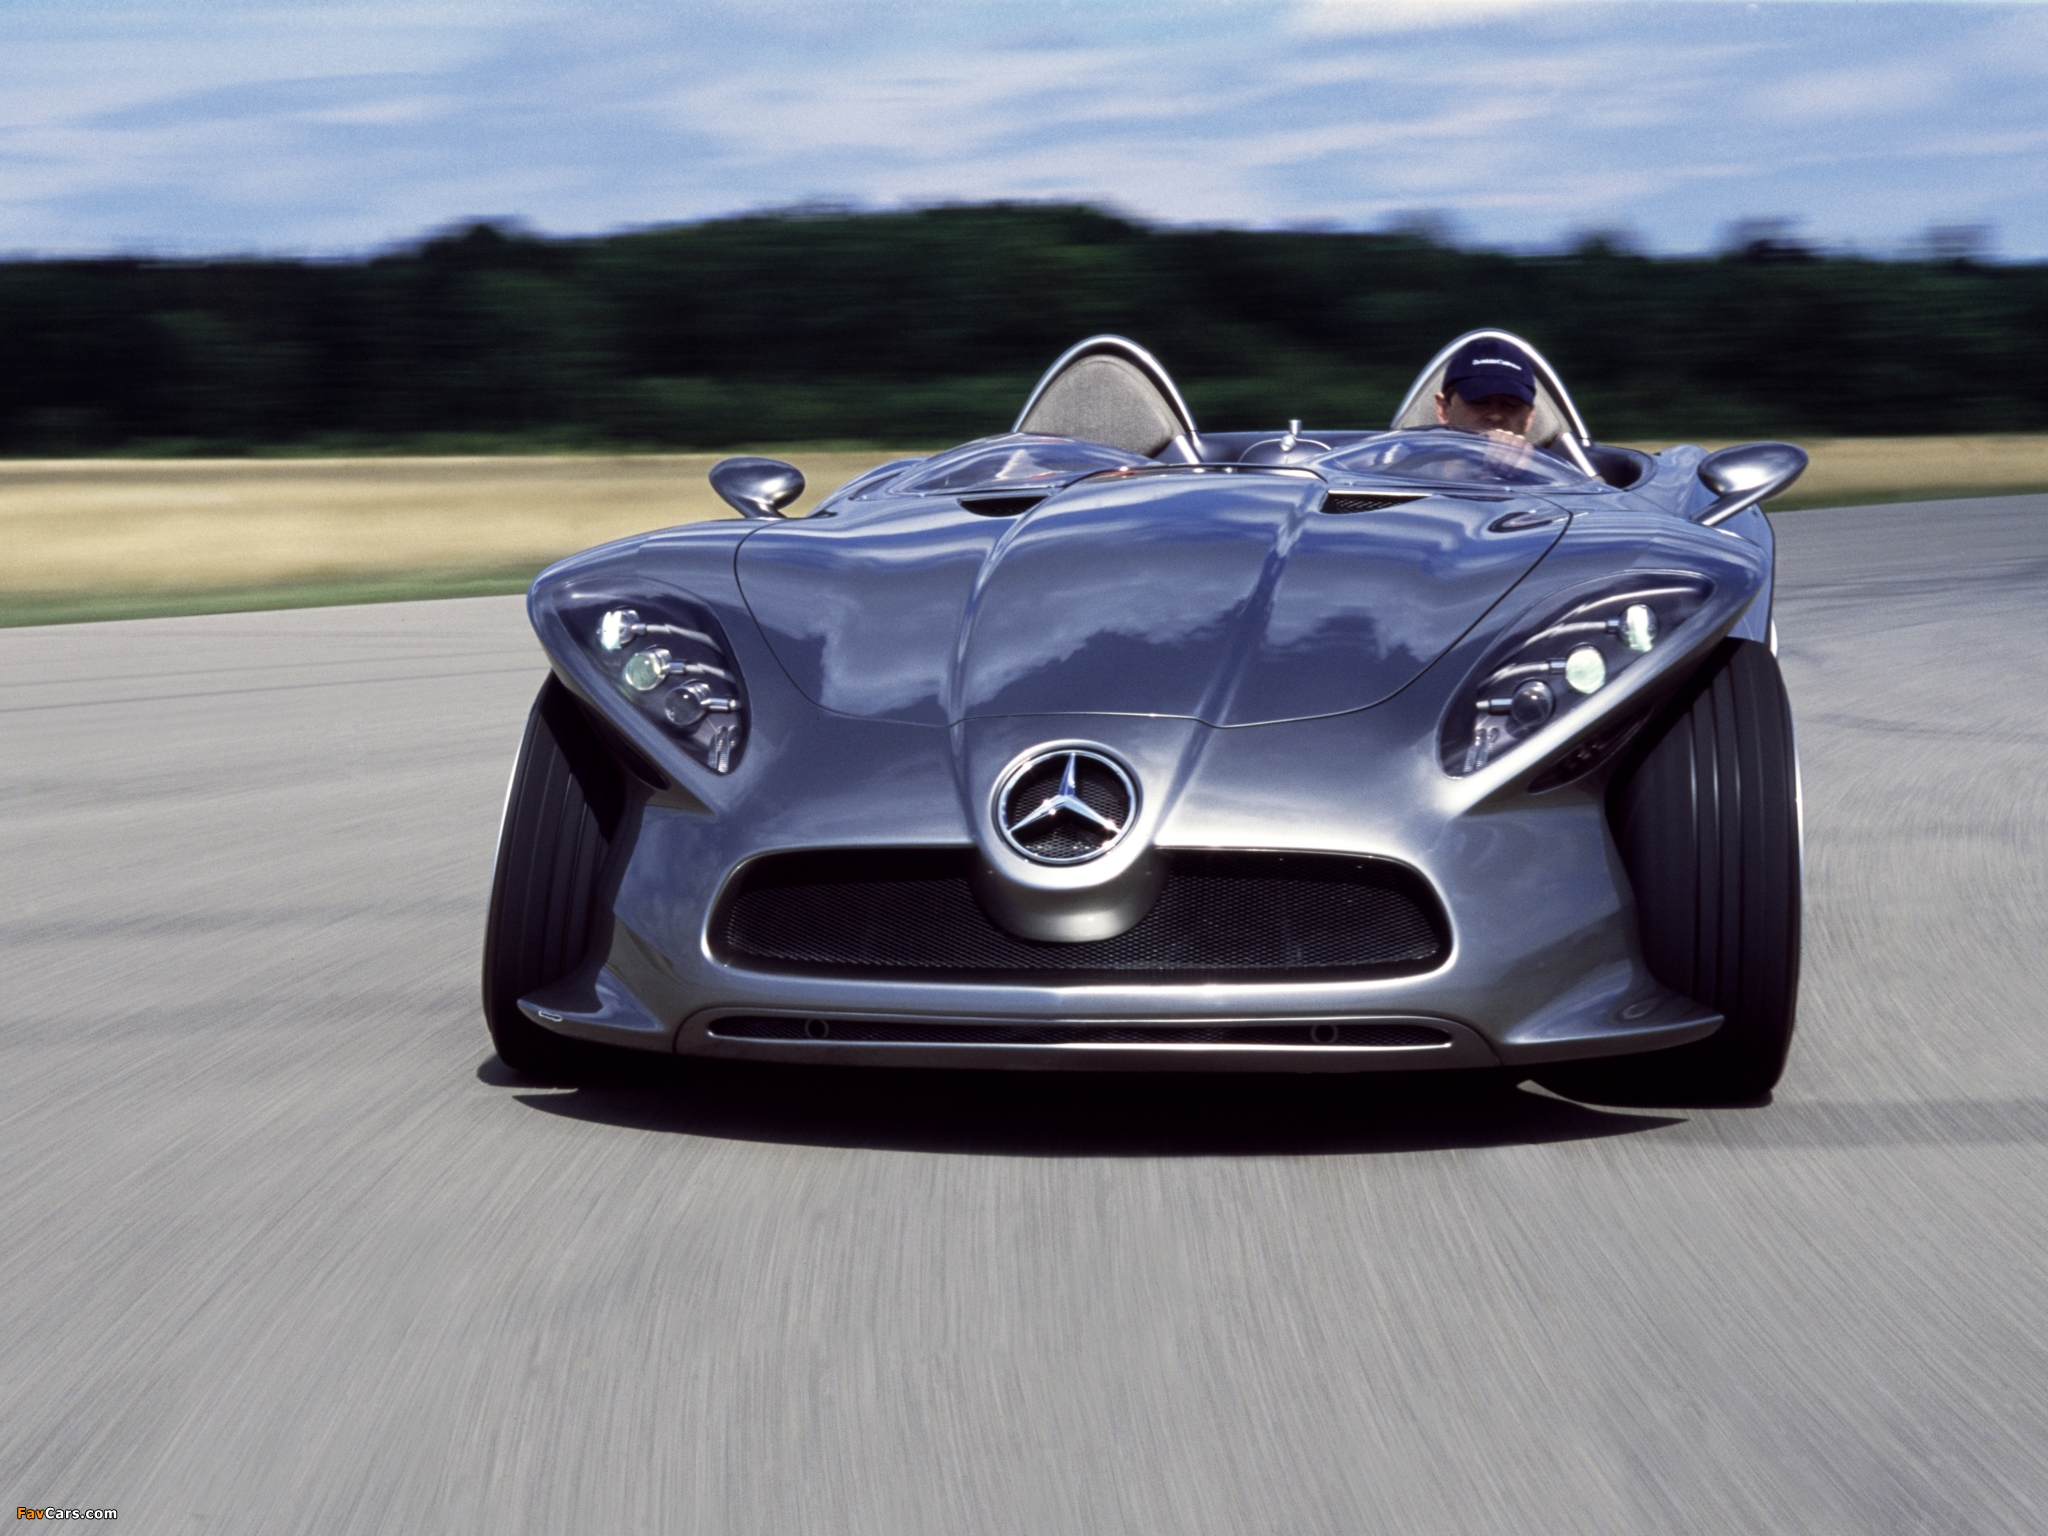 Mercedes-Benz F 400 Carving Concept Wallpapers